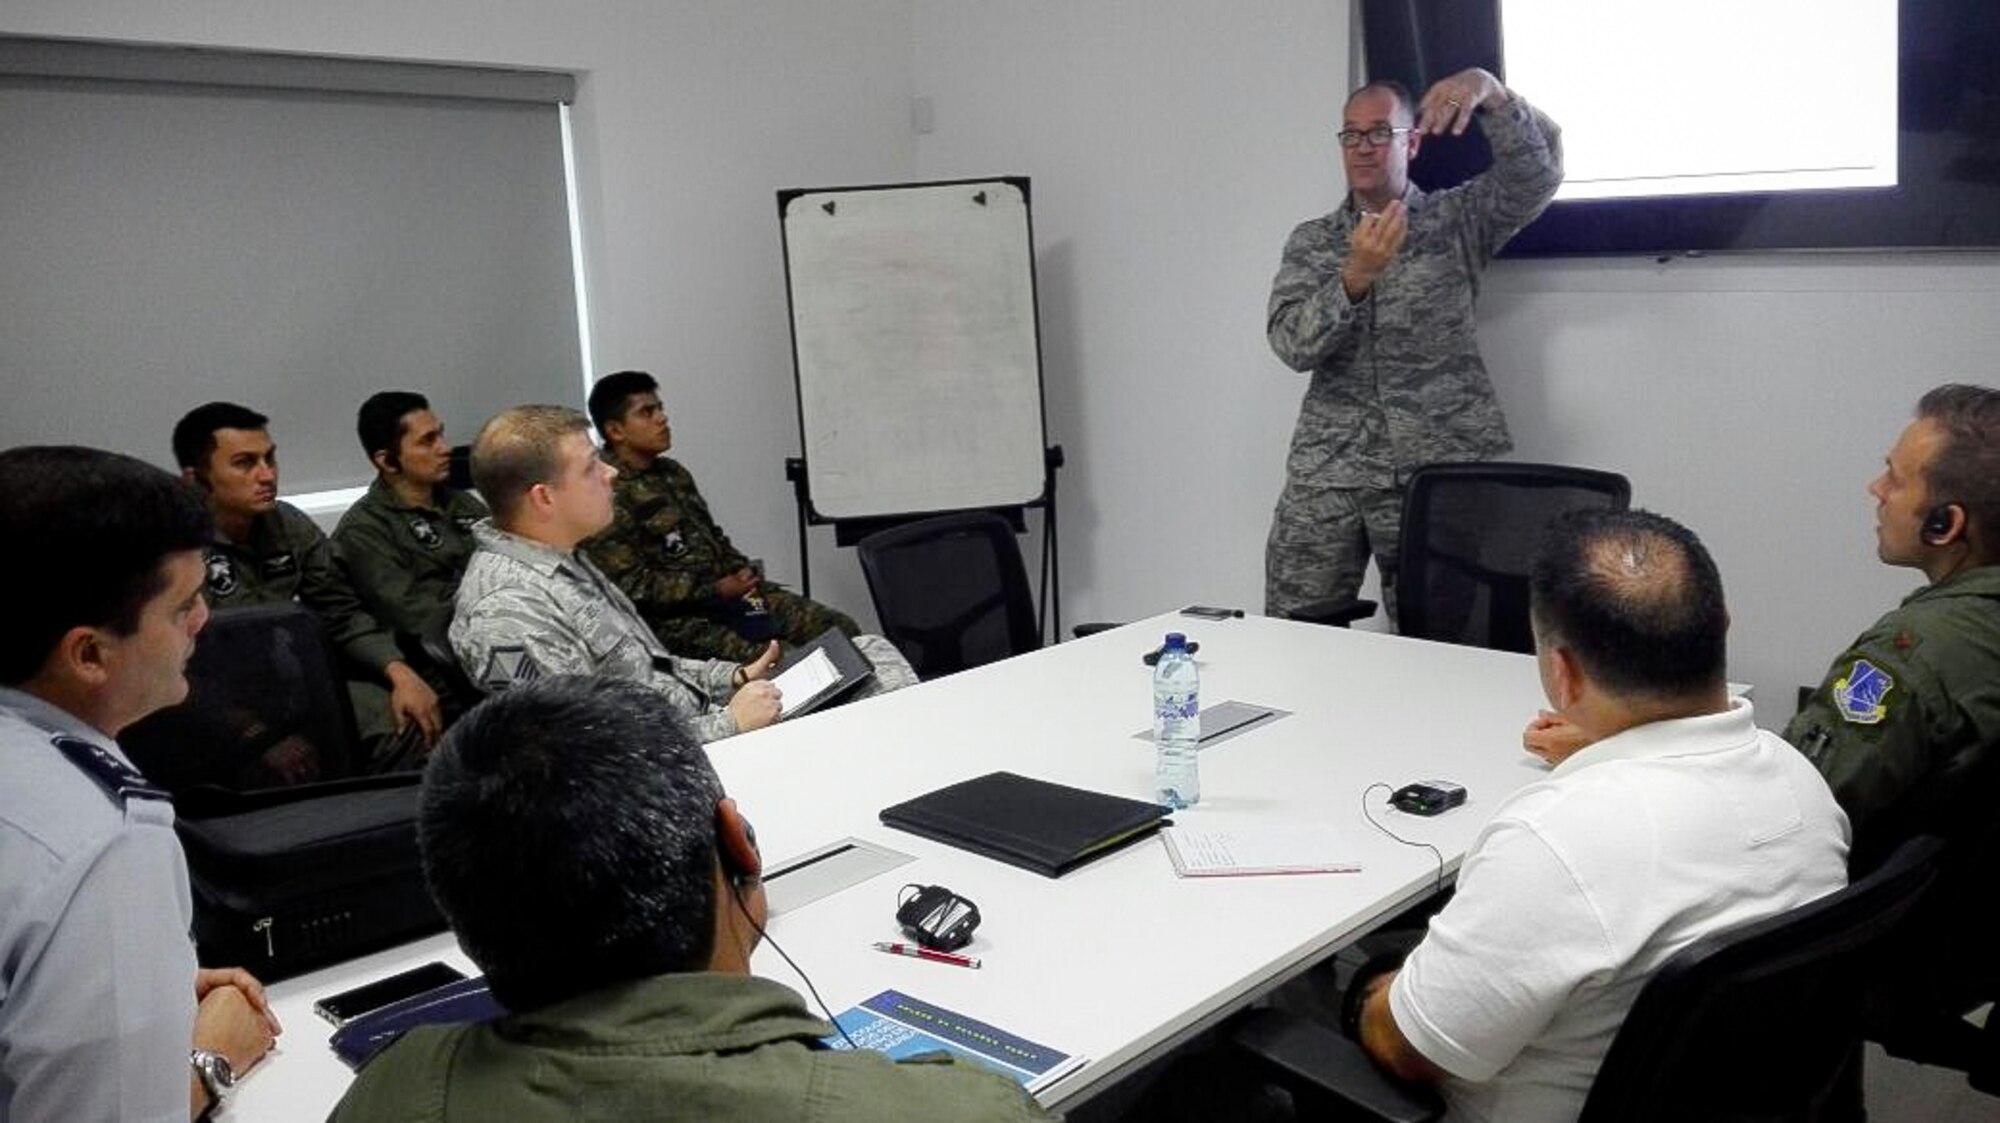 Lt. Col. Eric Corder, assistant director of operations for the 225th Air Defense Squadron, discusses air defense intercept concepts with the Guatemalan Air Force as part of the State Partnership Program Aug. 25, 2017.  The SPP links a state's National Guard with the armed forces of a partner country in a cooperative, mutually beneficial relationship by means of tailored, small footprint, high-impact security cooperation engagements that foster long-term enduring relationships with U.S. friends and allies around the world.  The SPP arose from a 1991 U.S. European Command decision to pair reserve component soldiers and airmen with the armed forces of the then newly formed nations of the Baltic Region following the collapse of the Soviet Bloc.